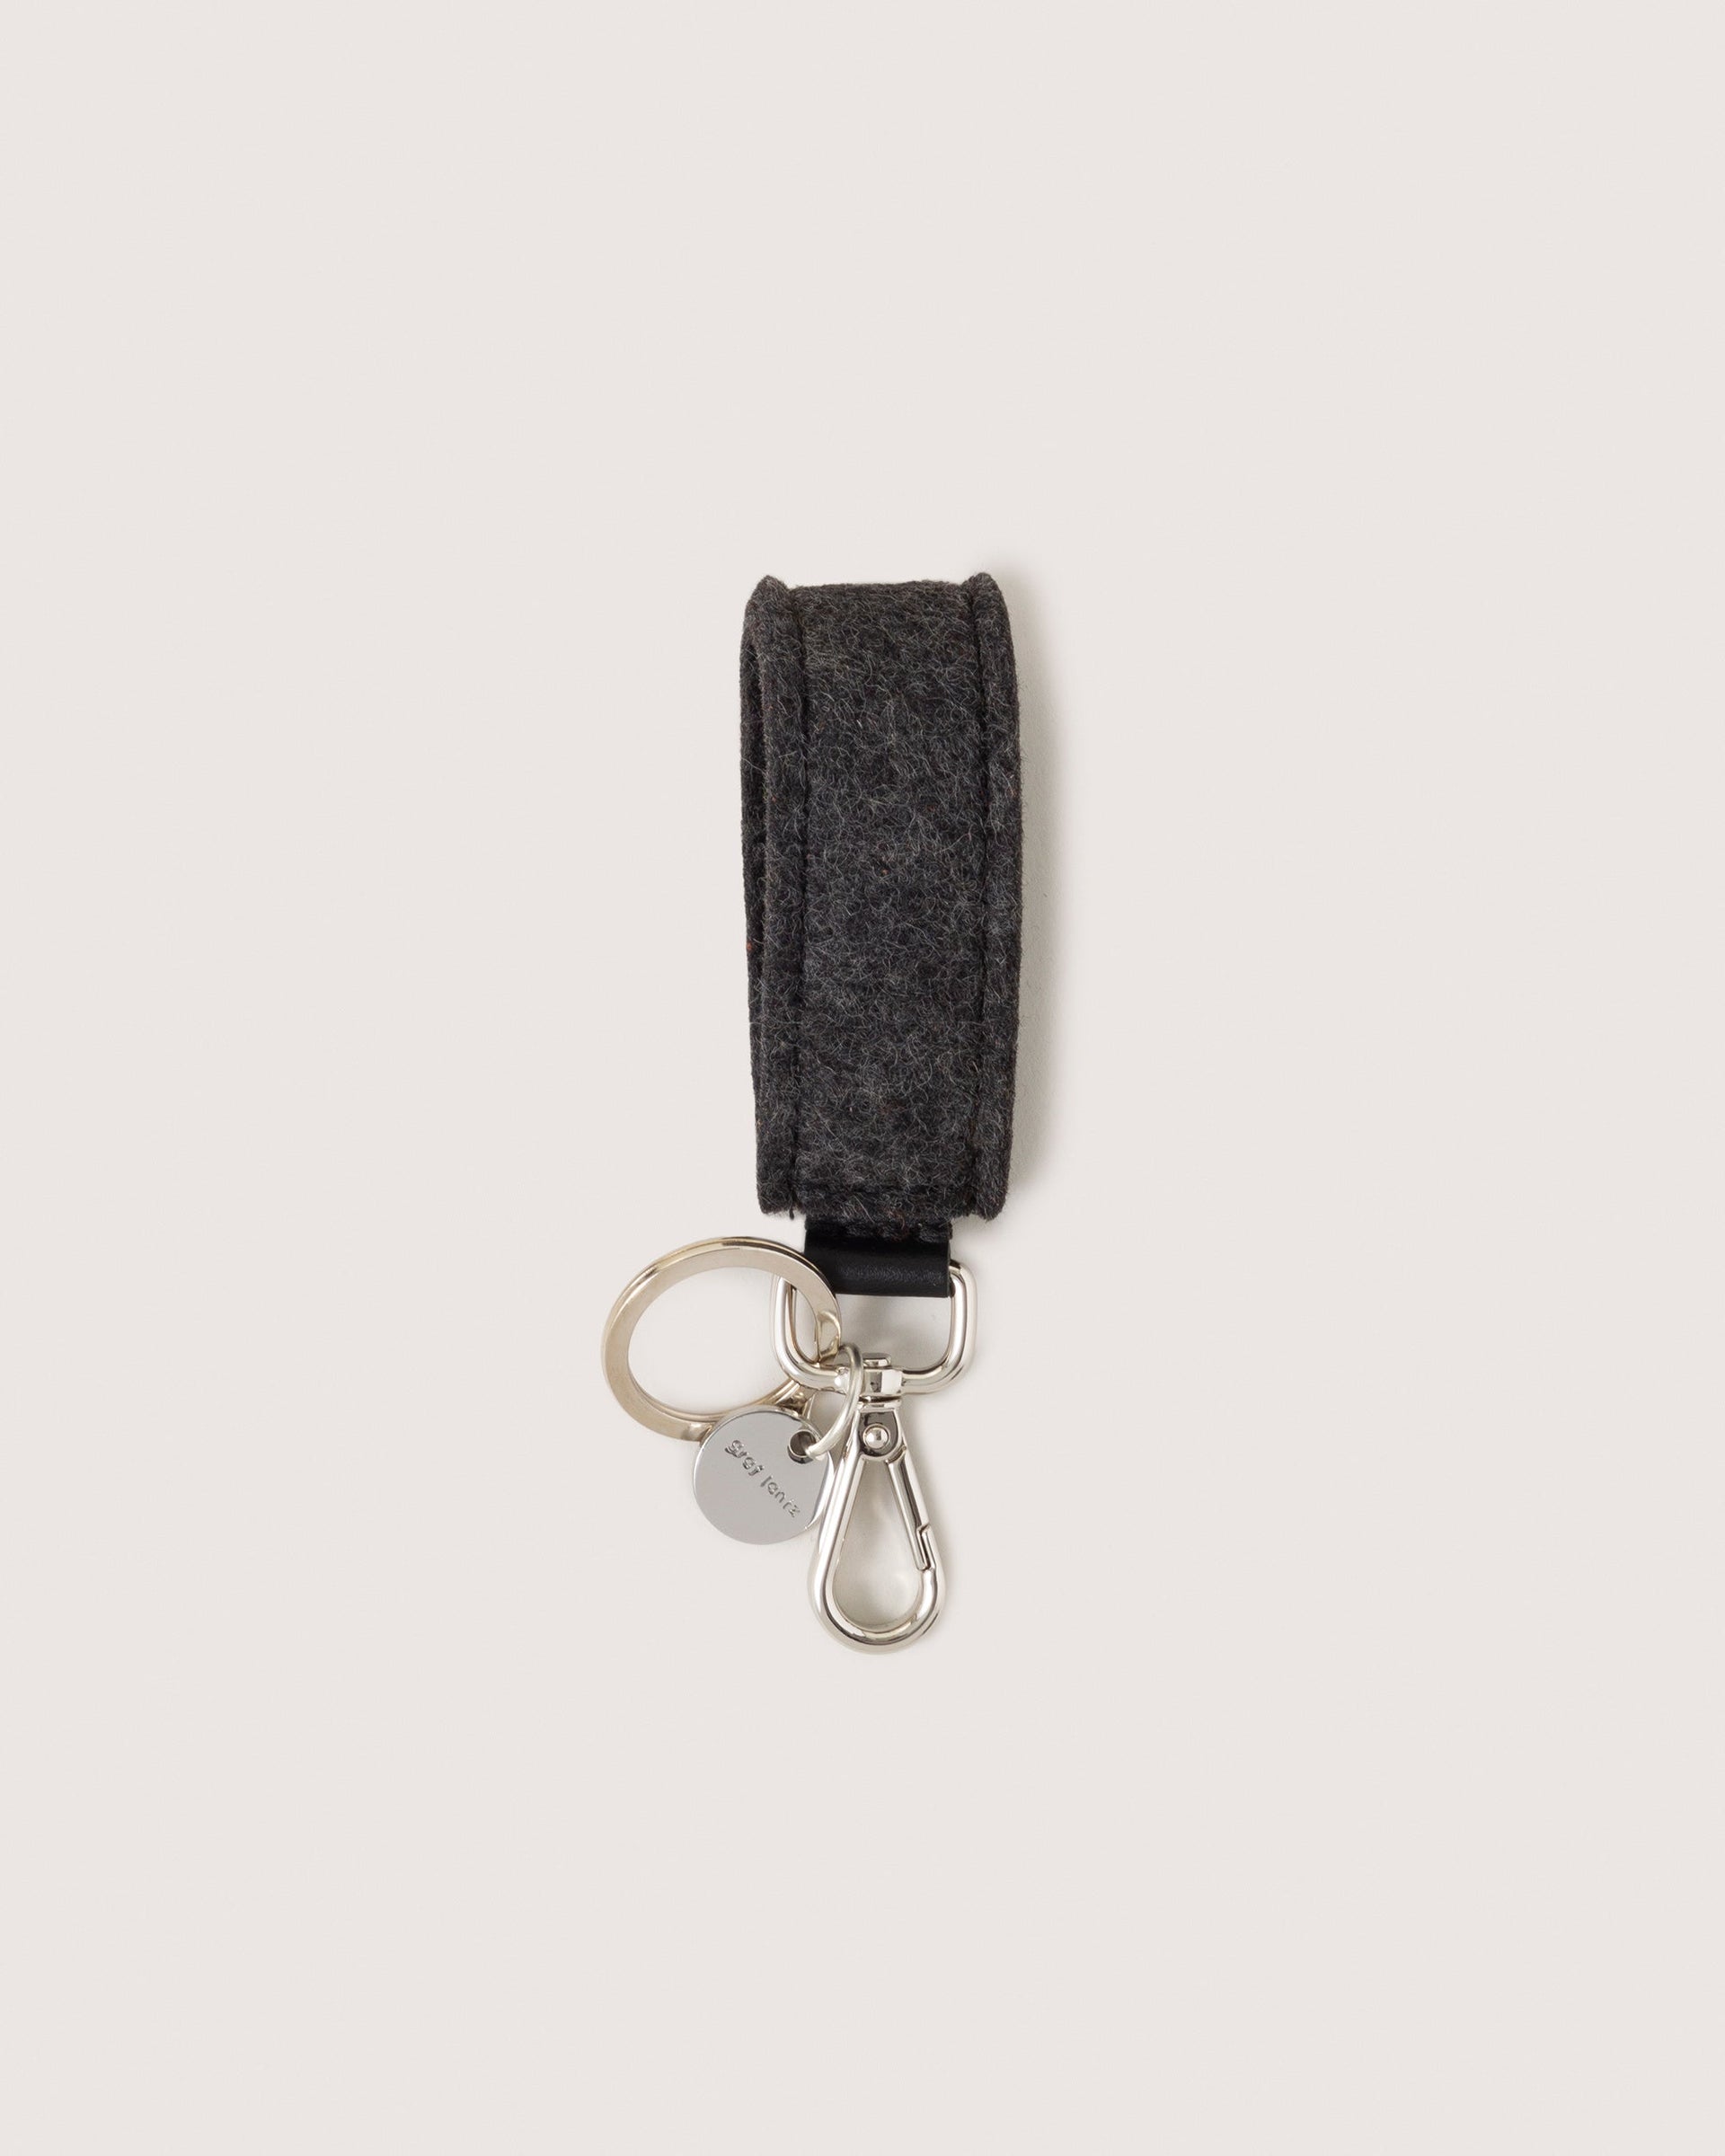 Charcoal Merino Wool Loop Key Fob with silver colored Lobster Clasp, Flat Wide. Keyring, and Logo Tog Tag, white background